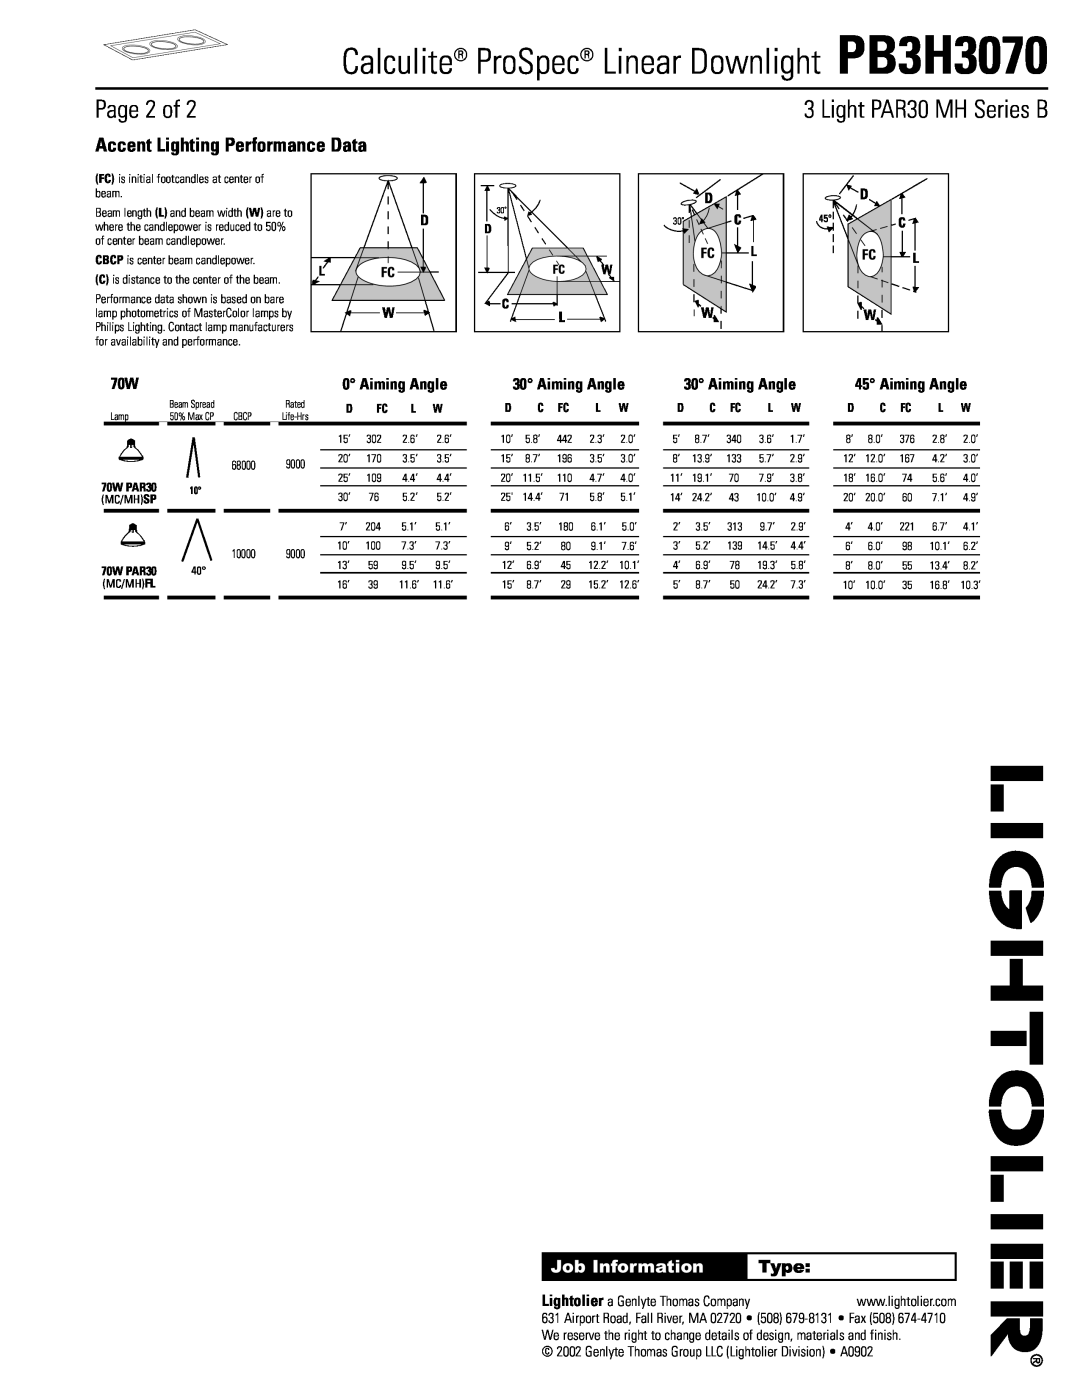 Lightolier Page 2 of, Accent Lighting Performance Data, Type, Calculite ProSpec Linear Downlight PB3H3070, Aiming Angle 